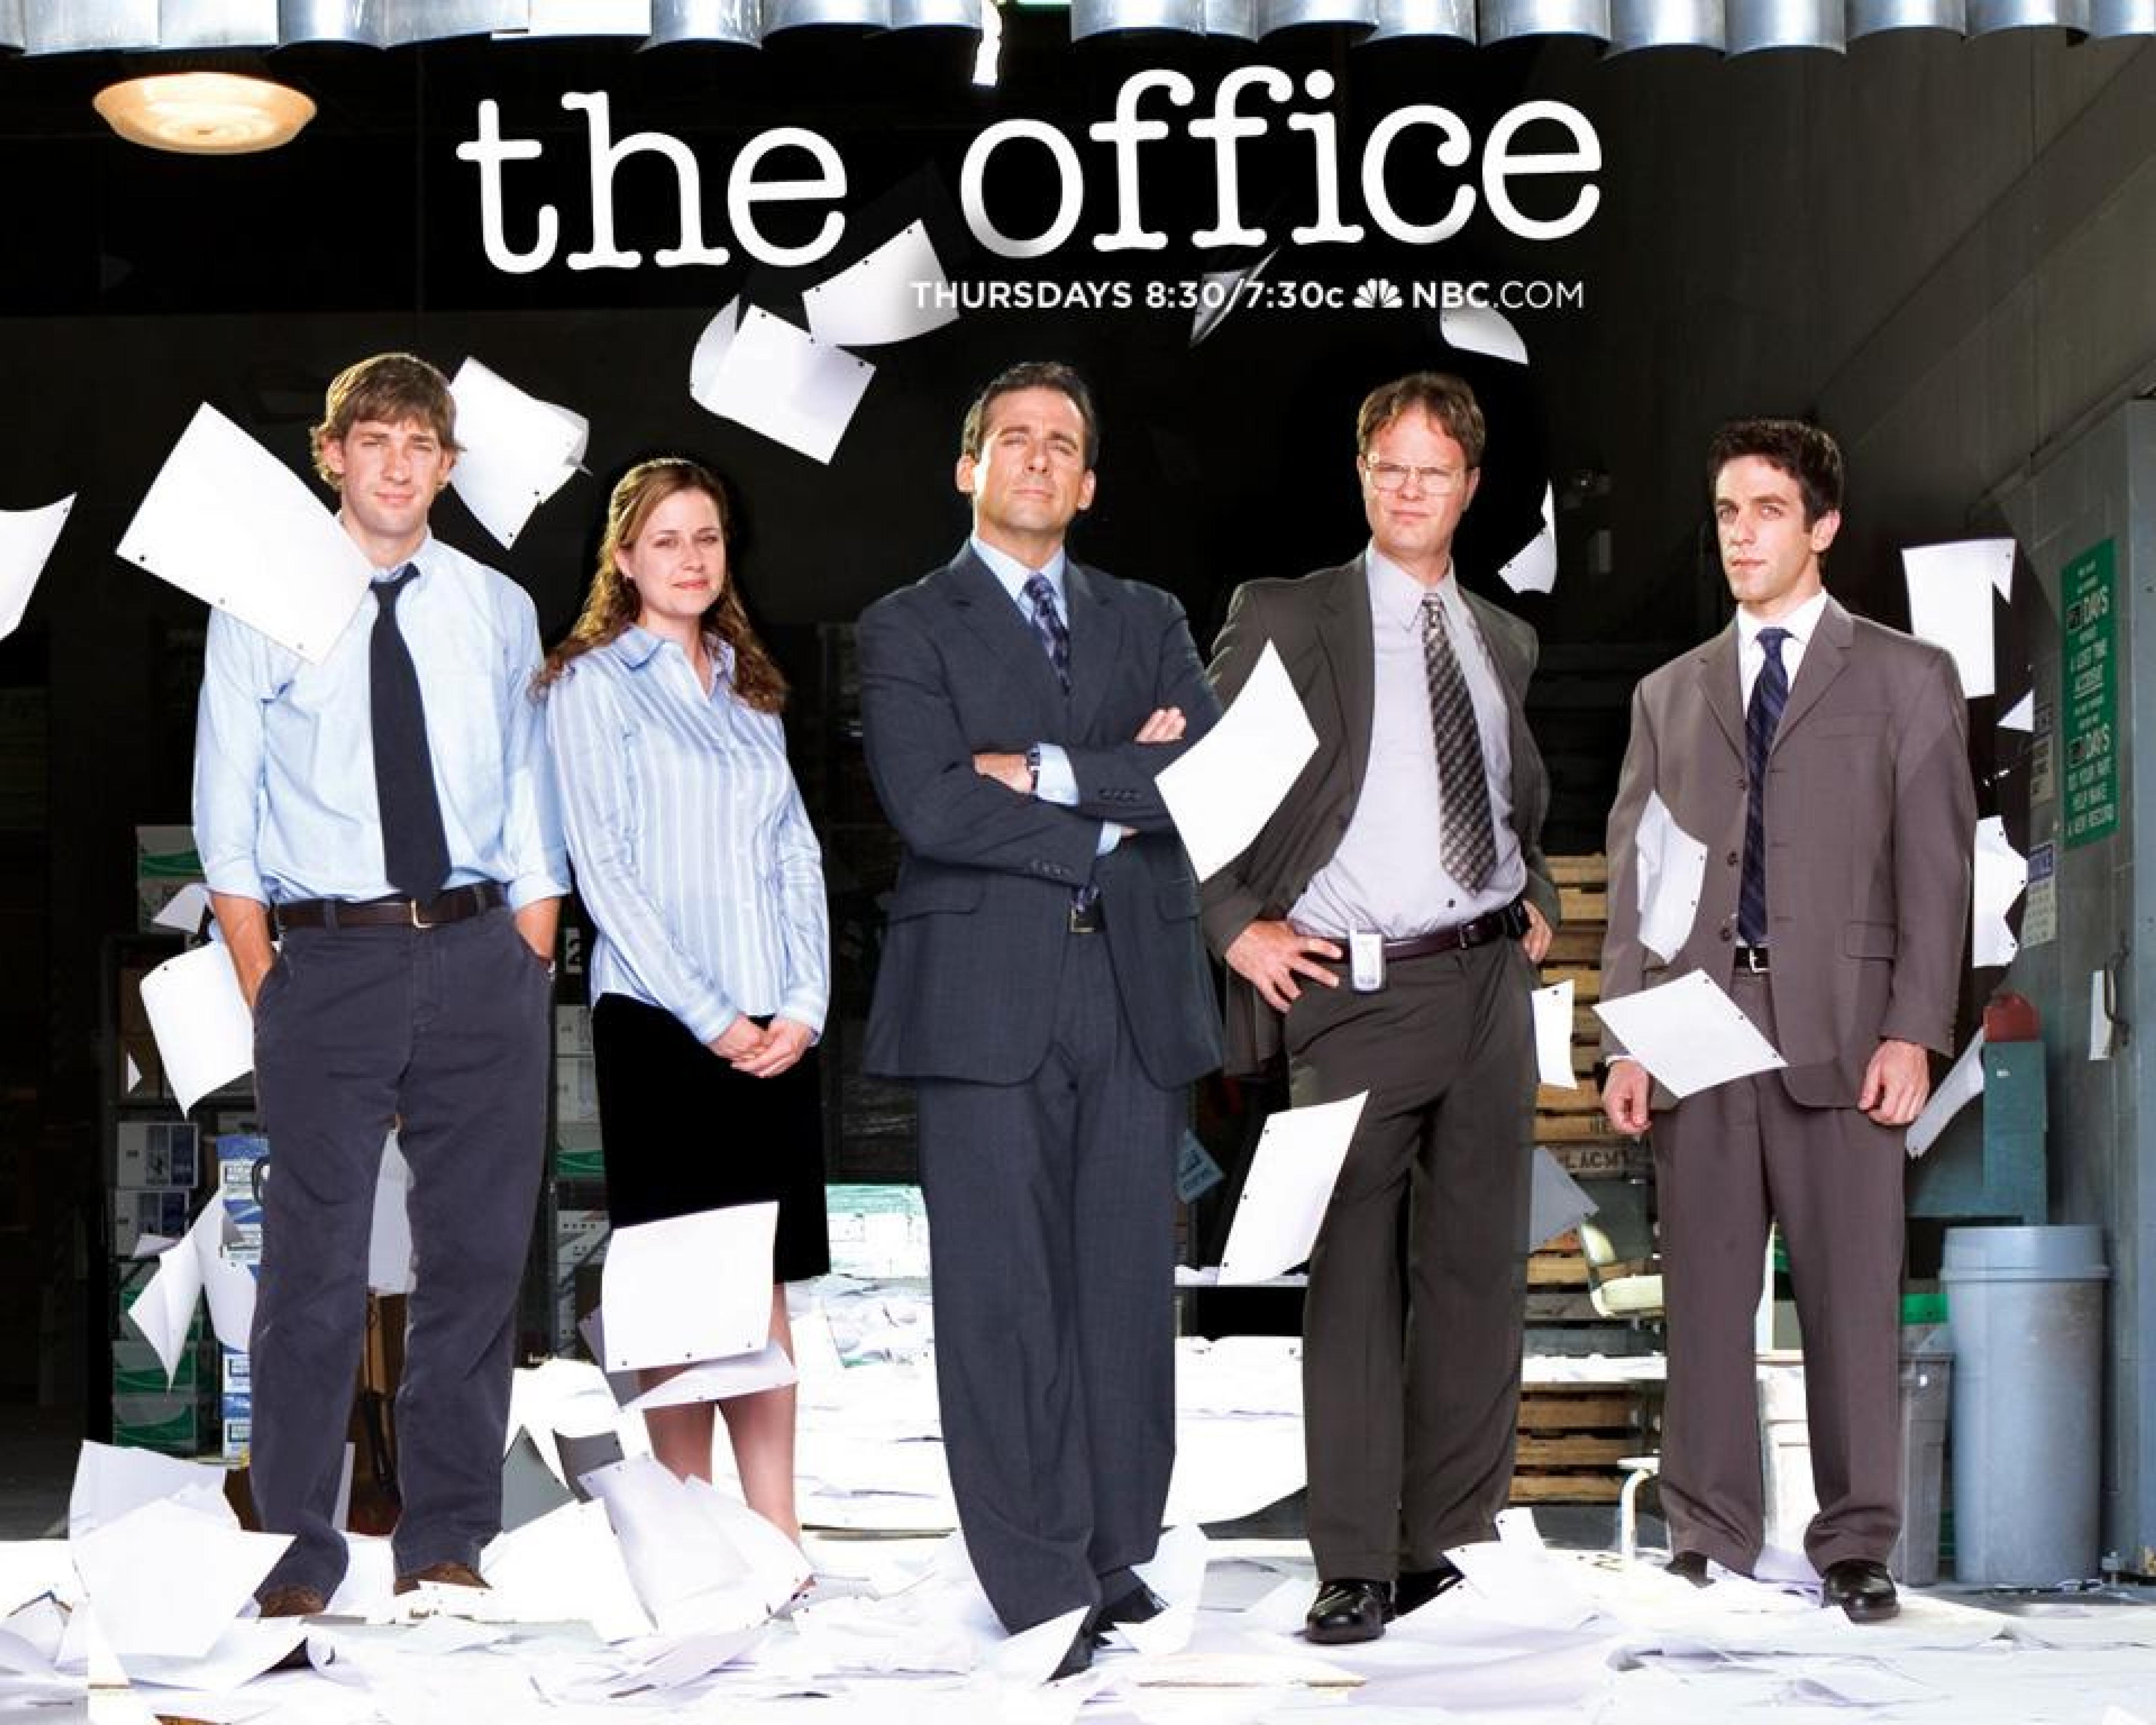 5120 x 4096 · jpeg - The Office Wallpapers, Pictures, Images